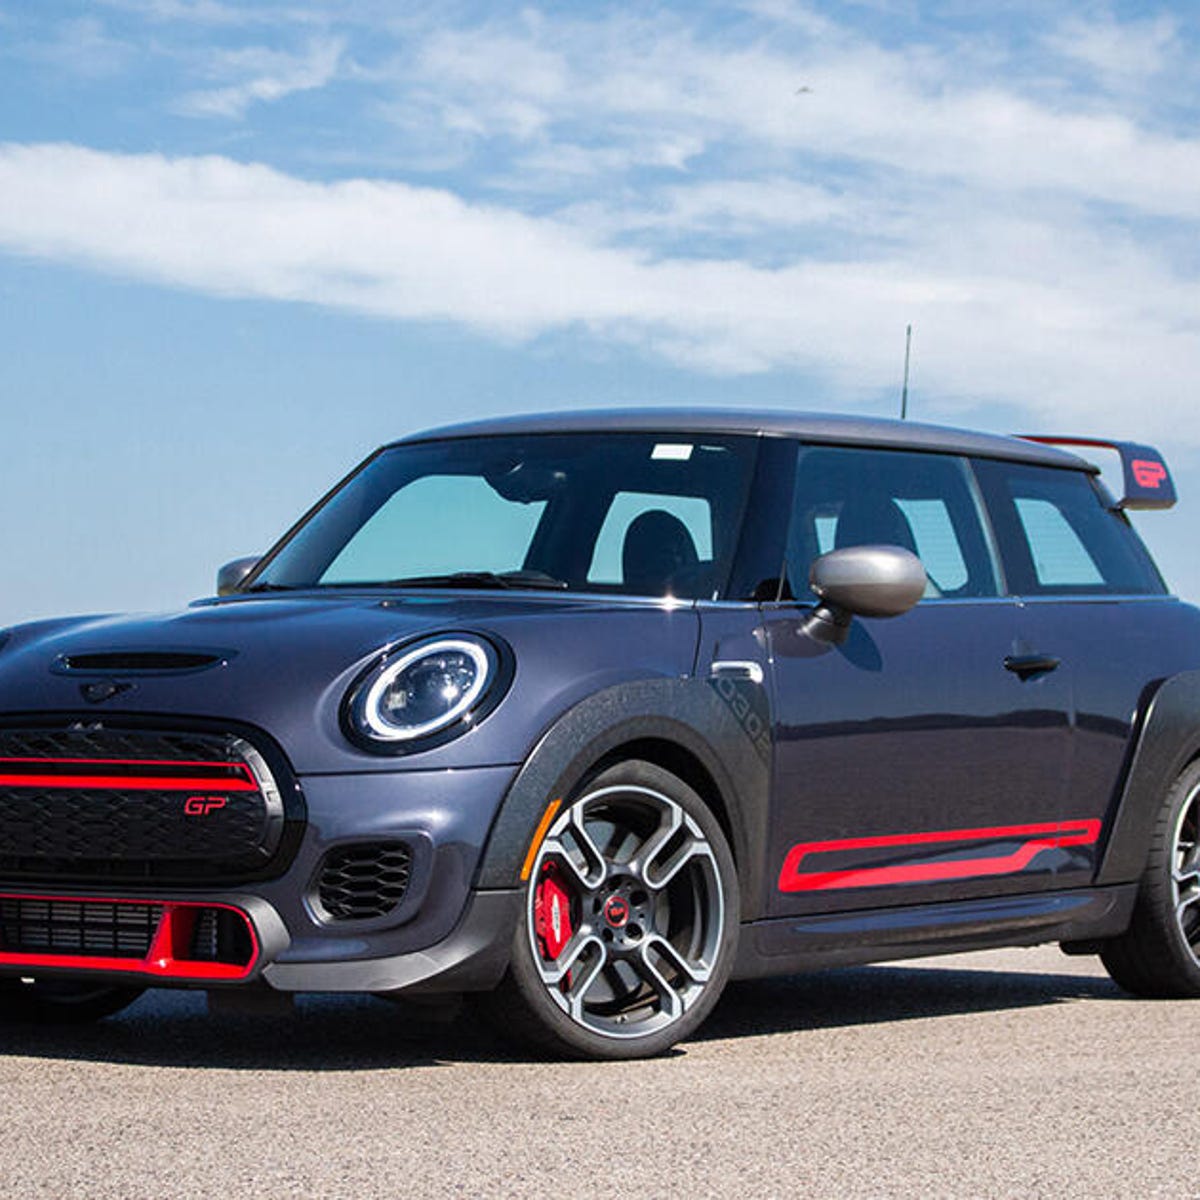 2021 Mini John Cooper Works GP review: An almost-grand finale - CNET